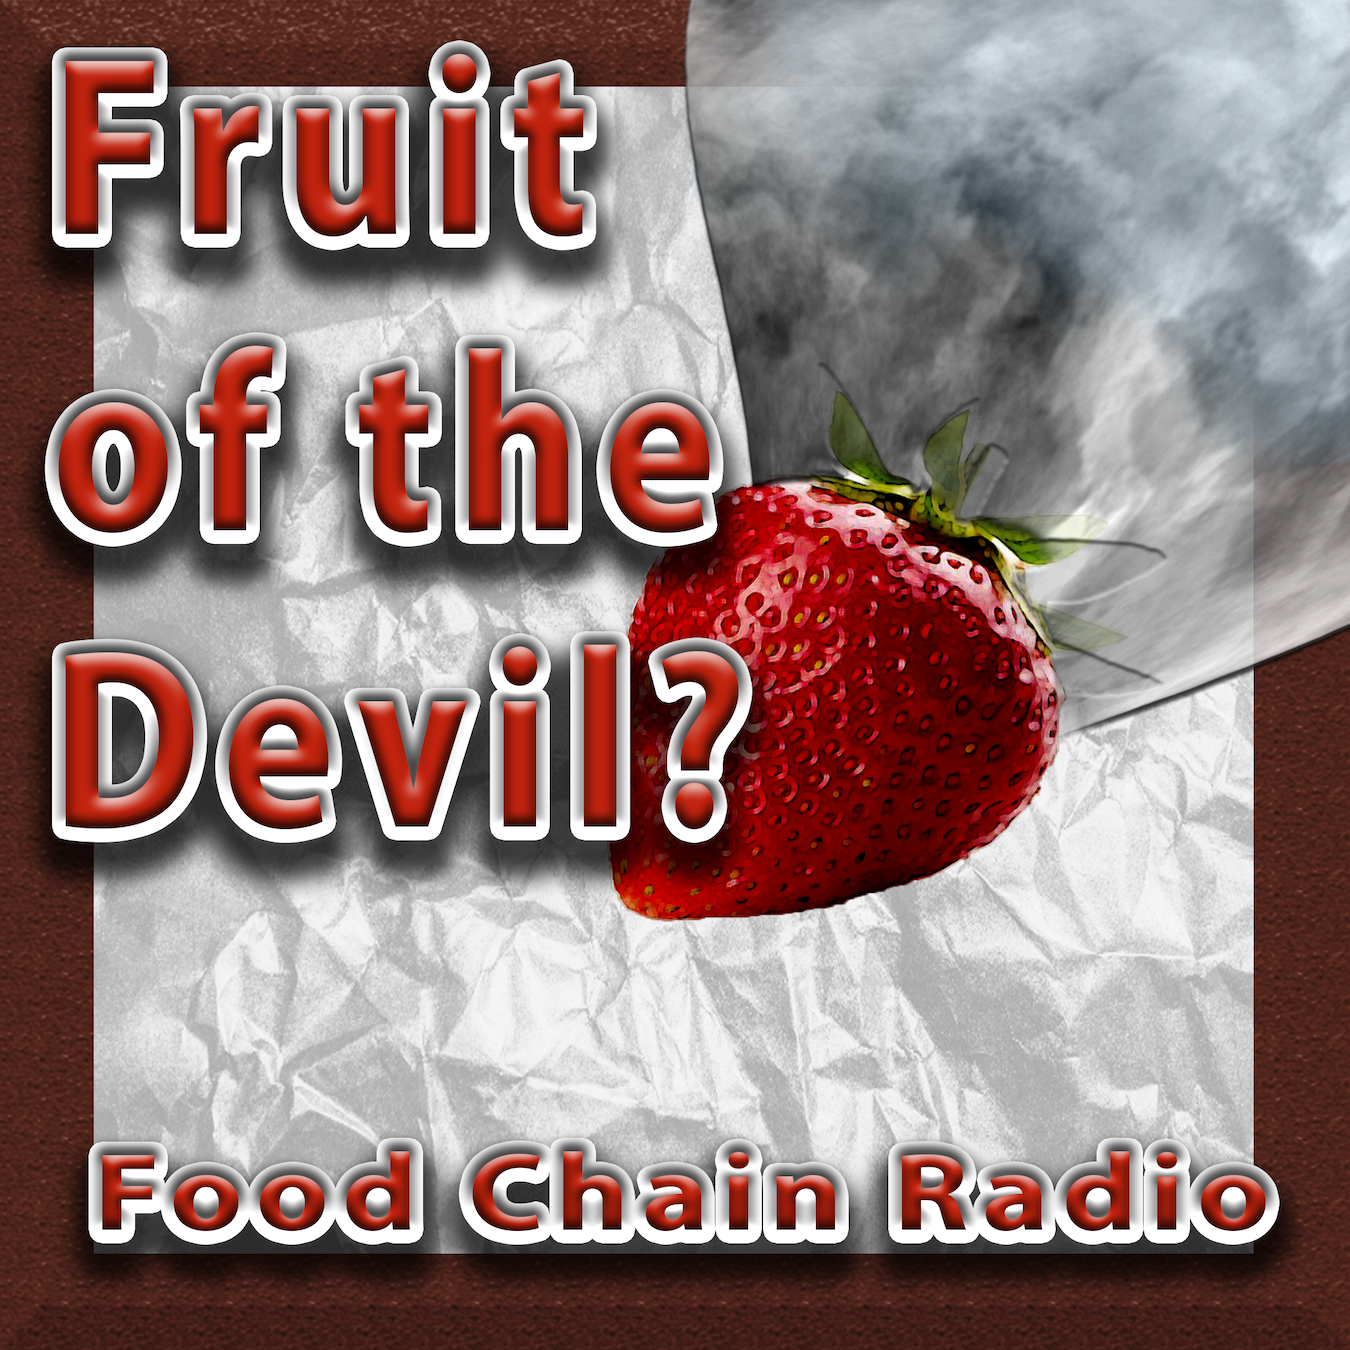 Michael Olson Food Chain Radio - The Strawberry Industry and Fruit of the Devil